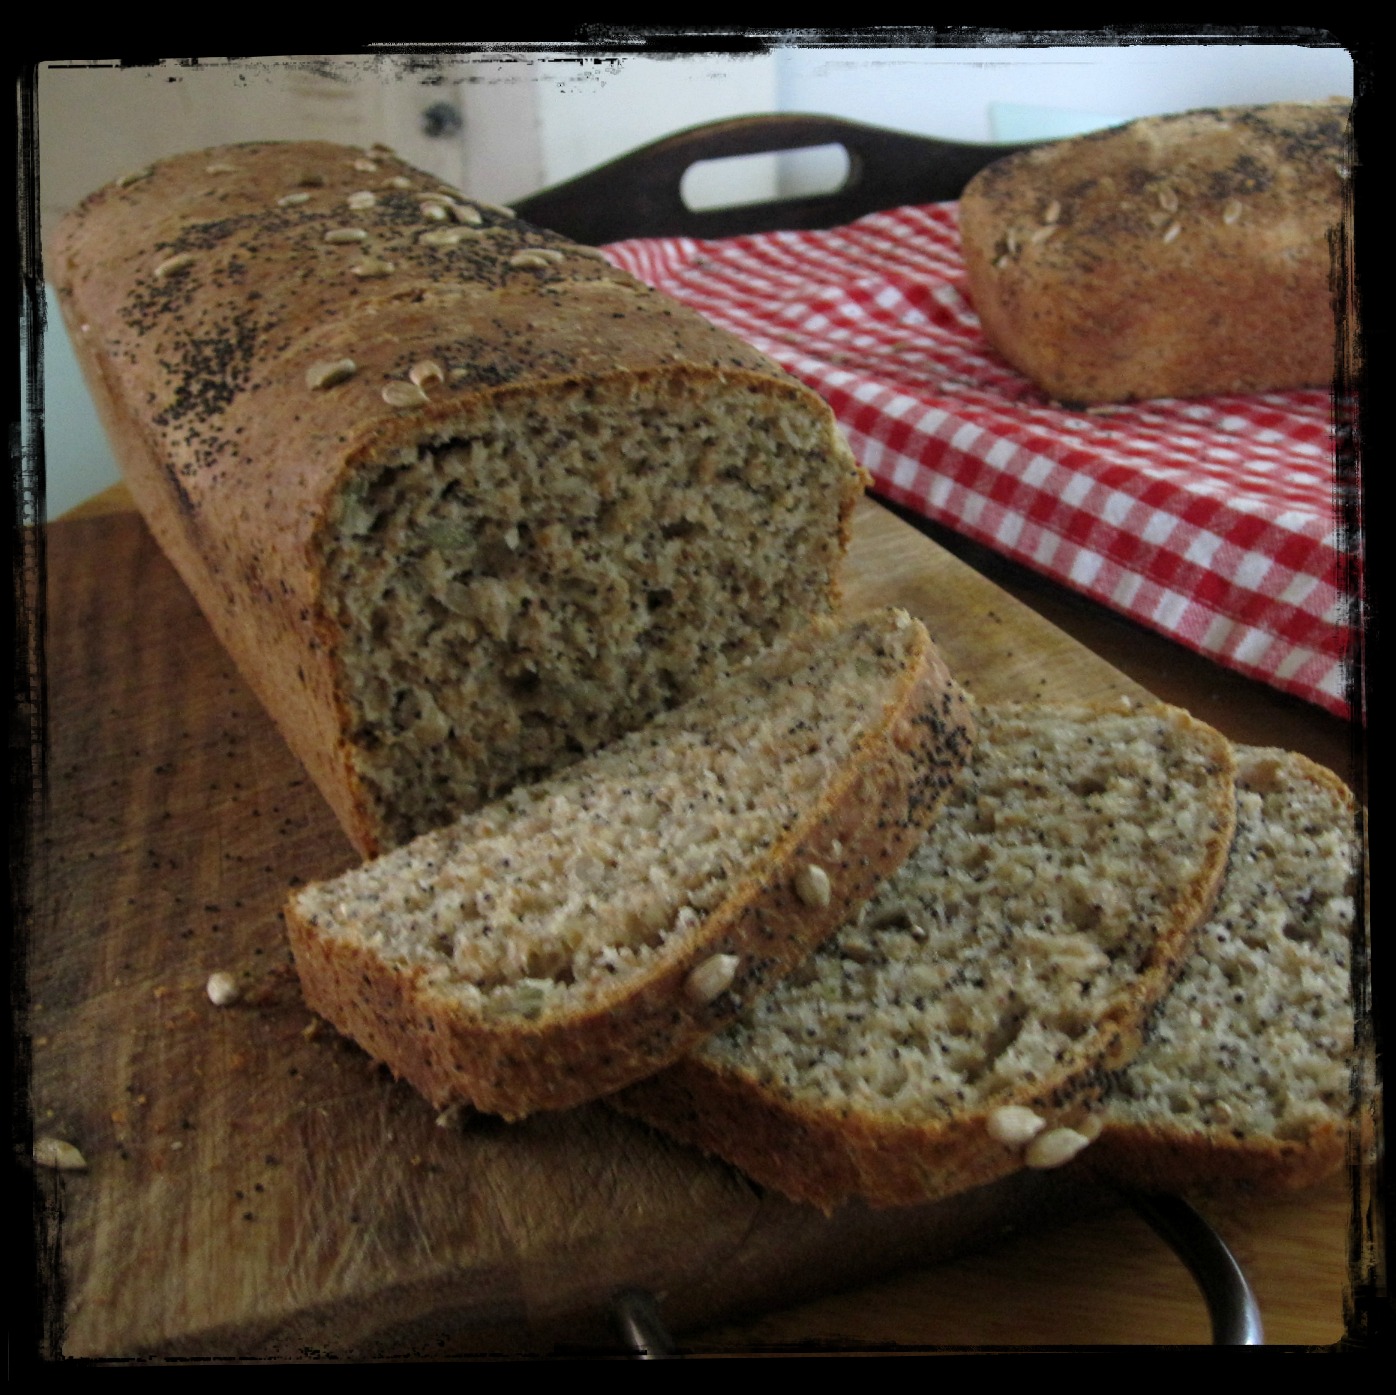 To Tame Me: Brown seed bread